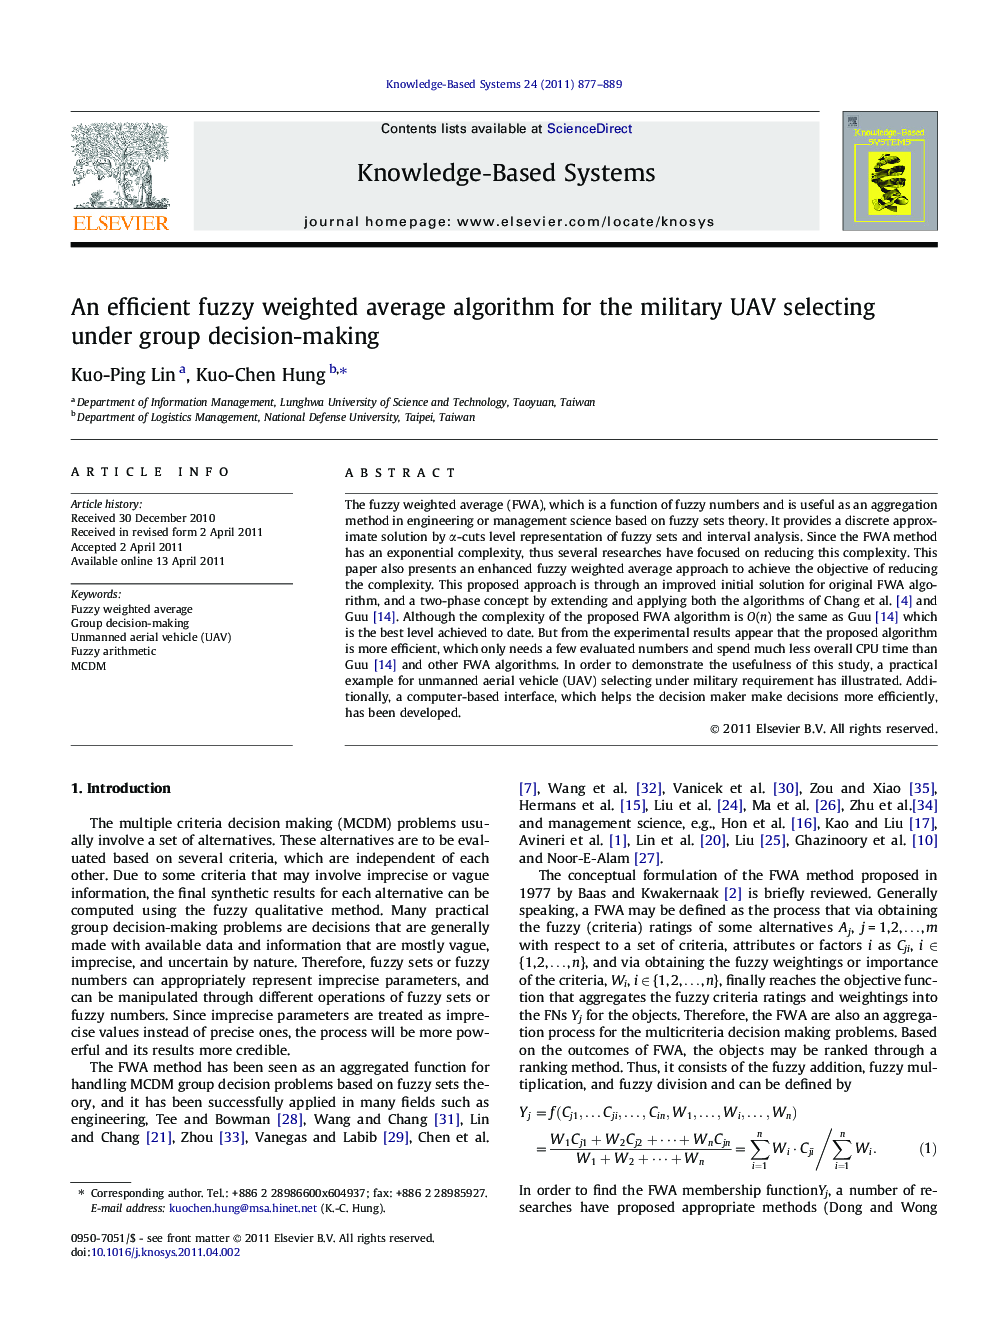 An efficient fuzzy weighted average algorithm for the military UAV selecting under group decision-making